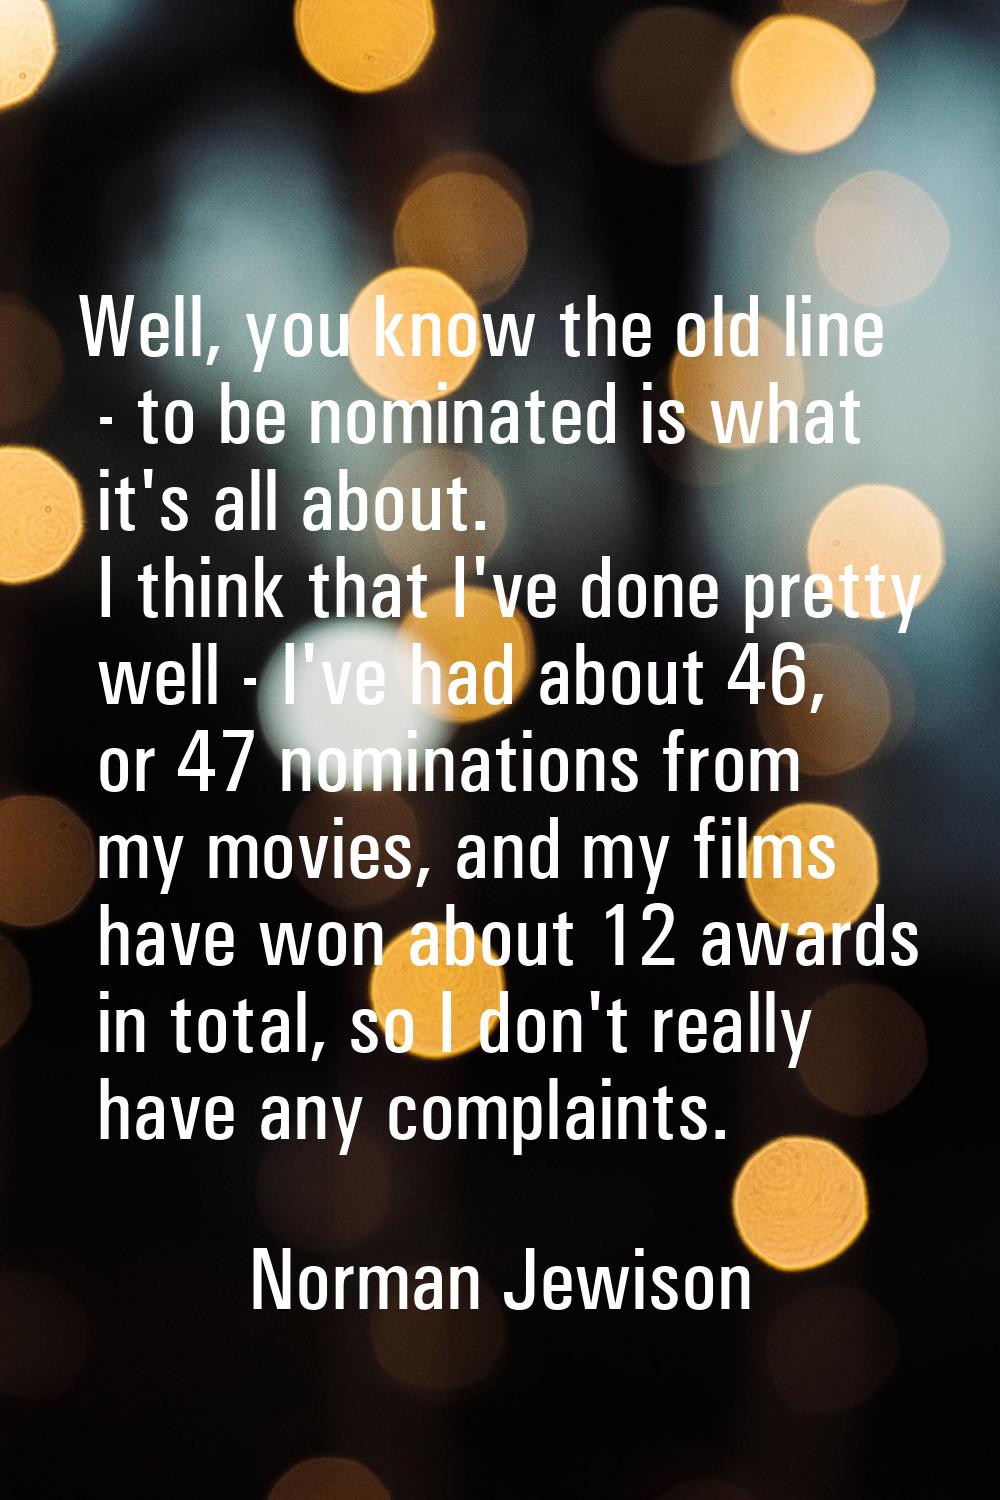 Well, you know the old line - to be nominated is what it's all about. I think that I've done pretty